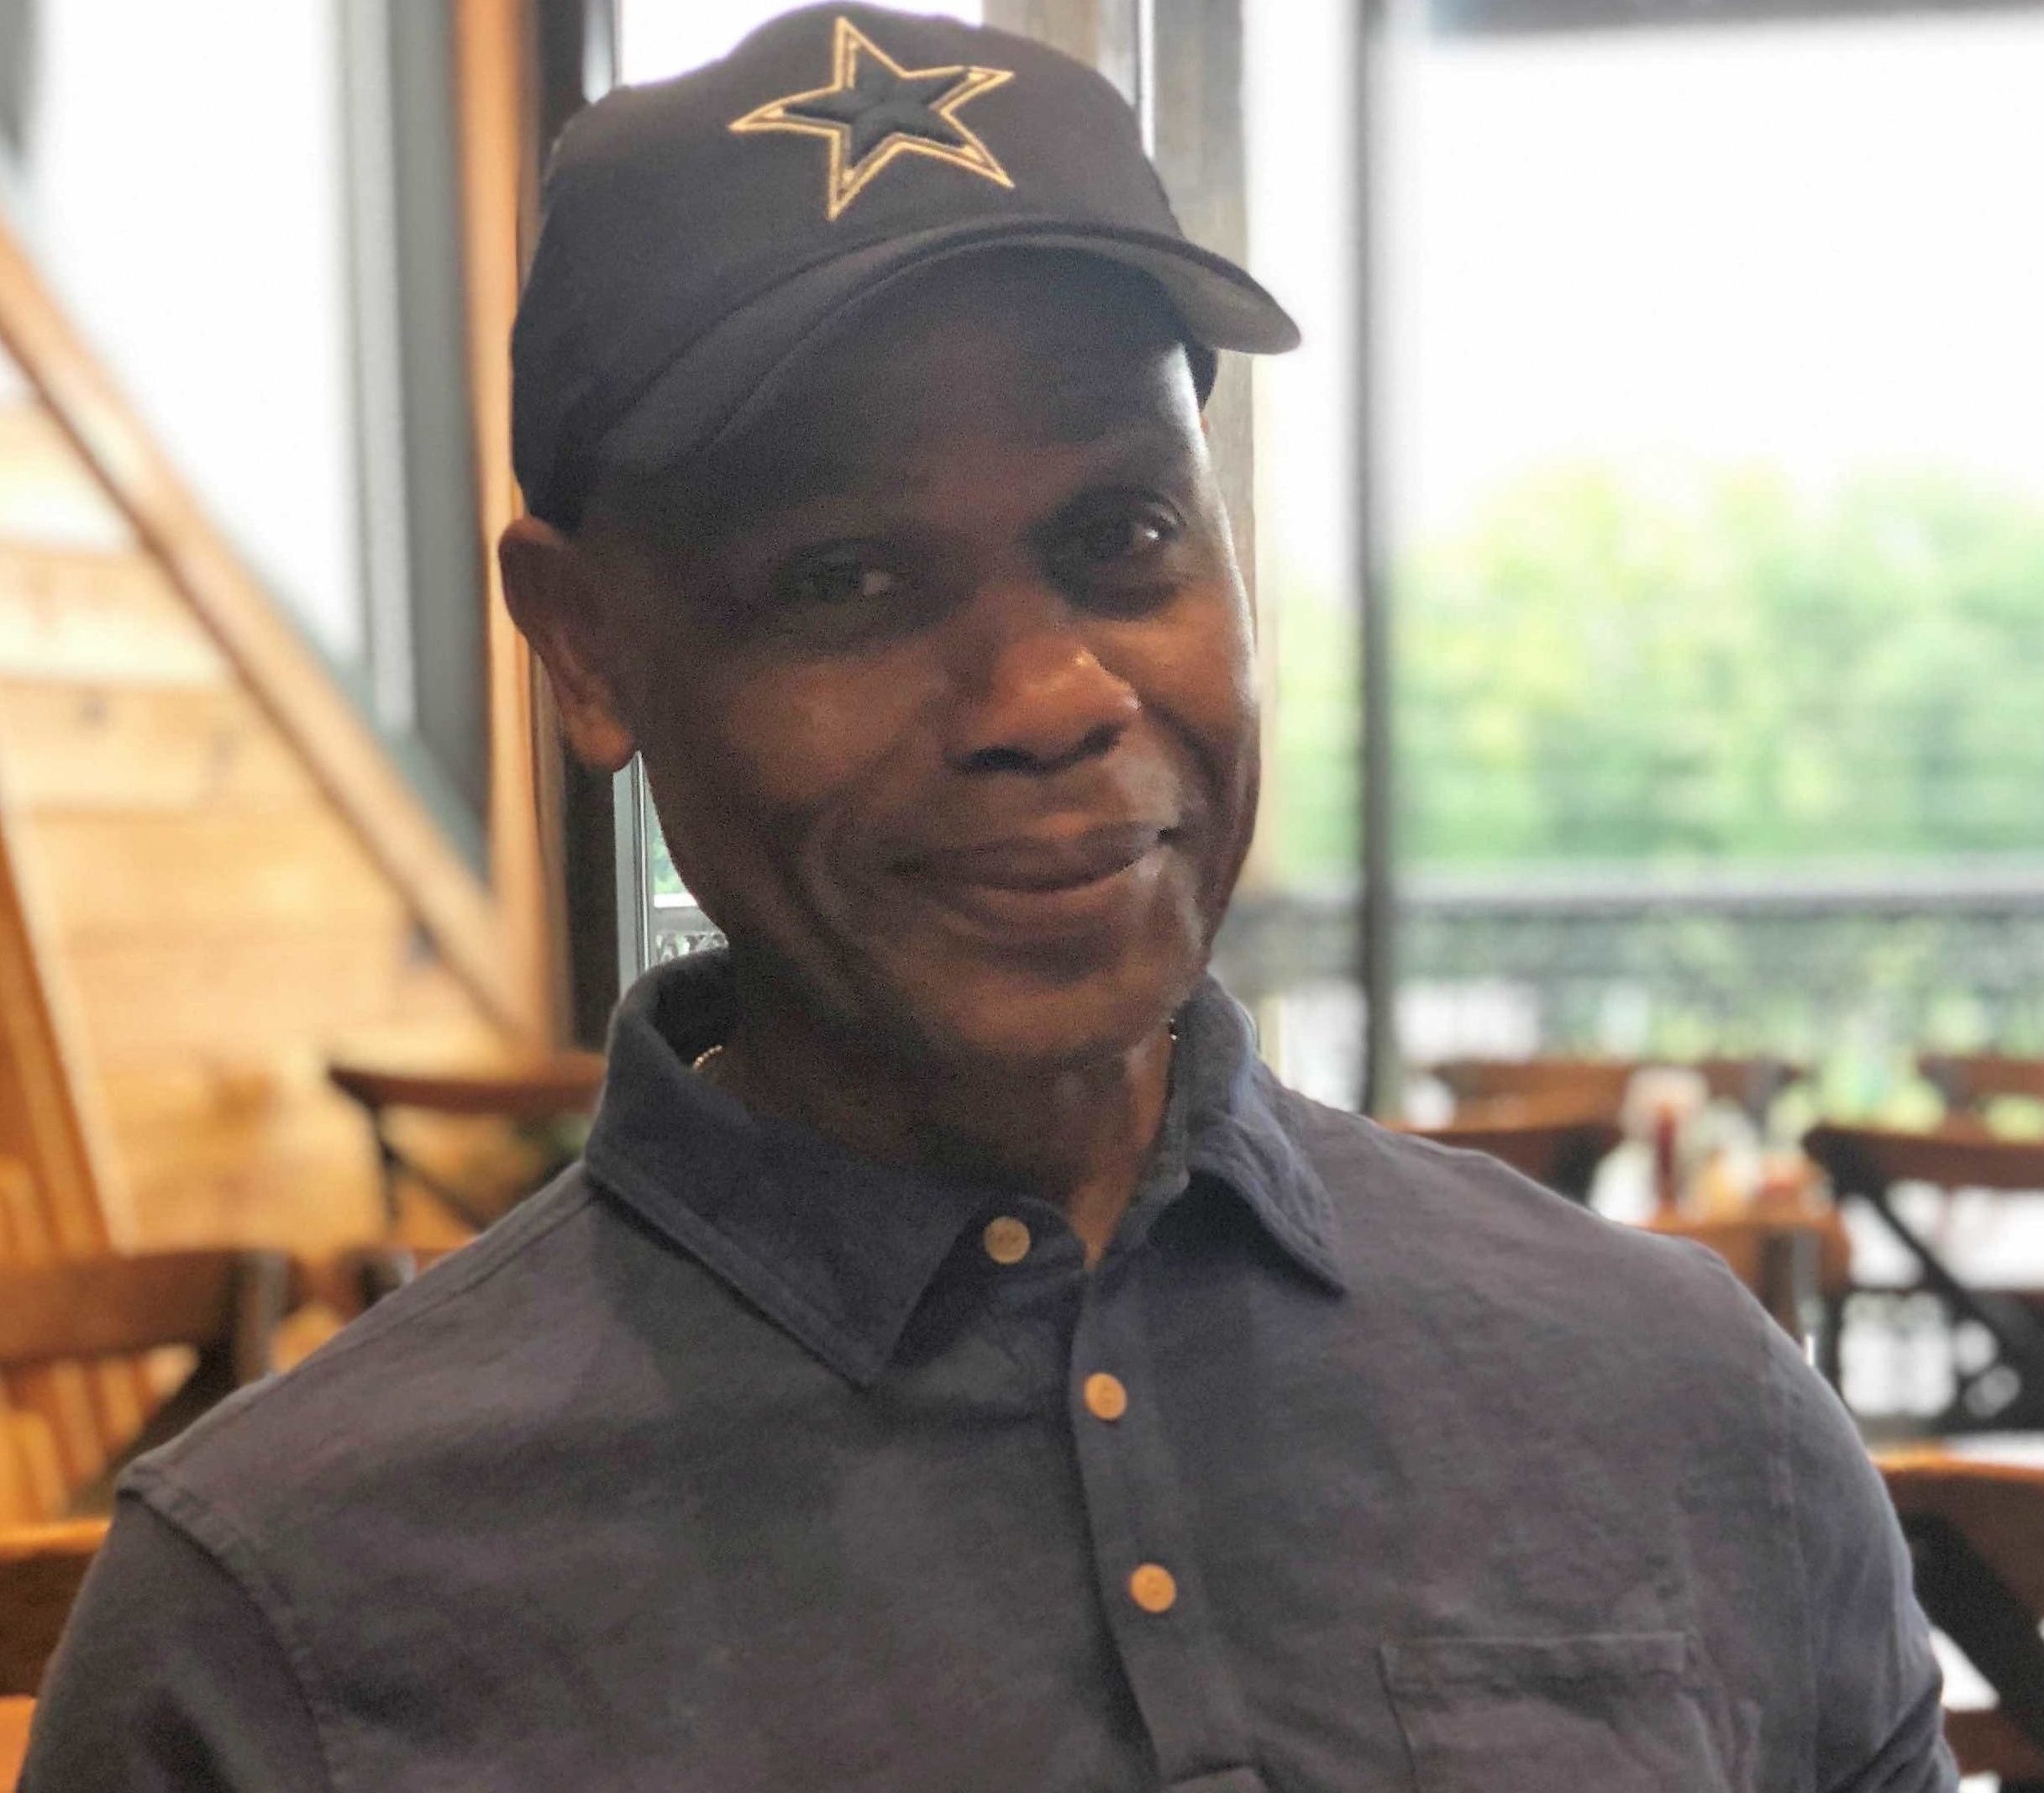 Gerald Manning was released on June 19, 2018 after being wrongfully incarcerated for 42 years. Photo: Cat Forrester, courtesy of IPNO.